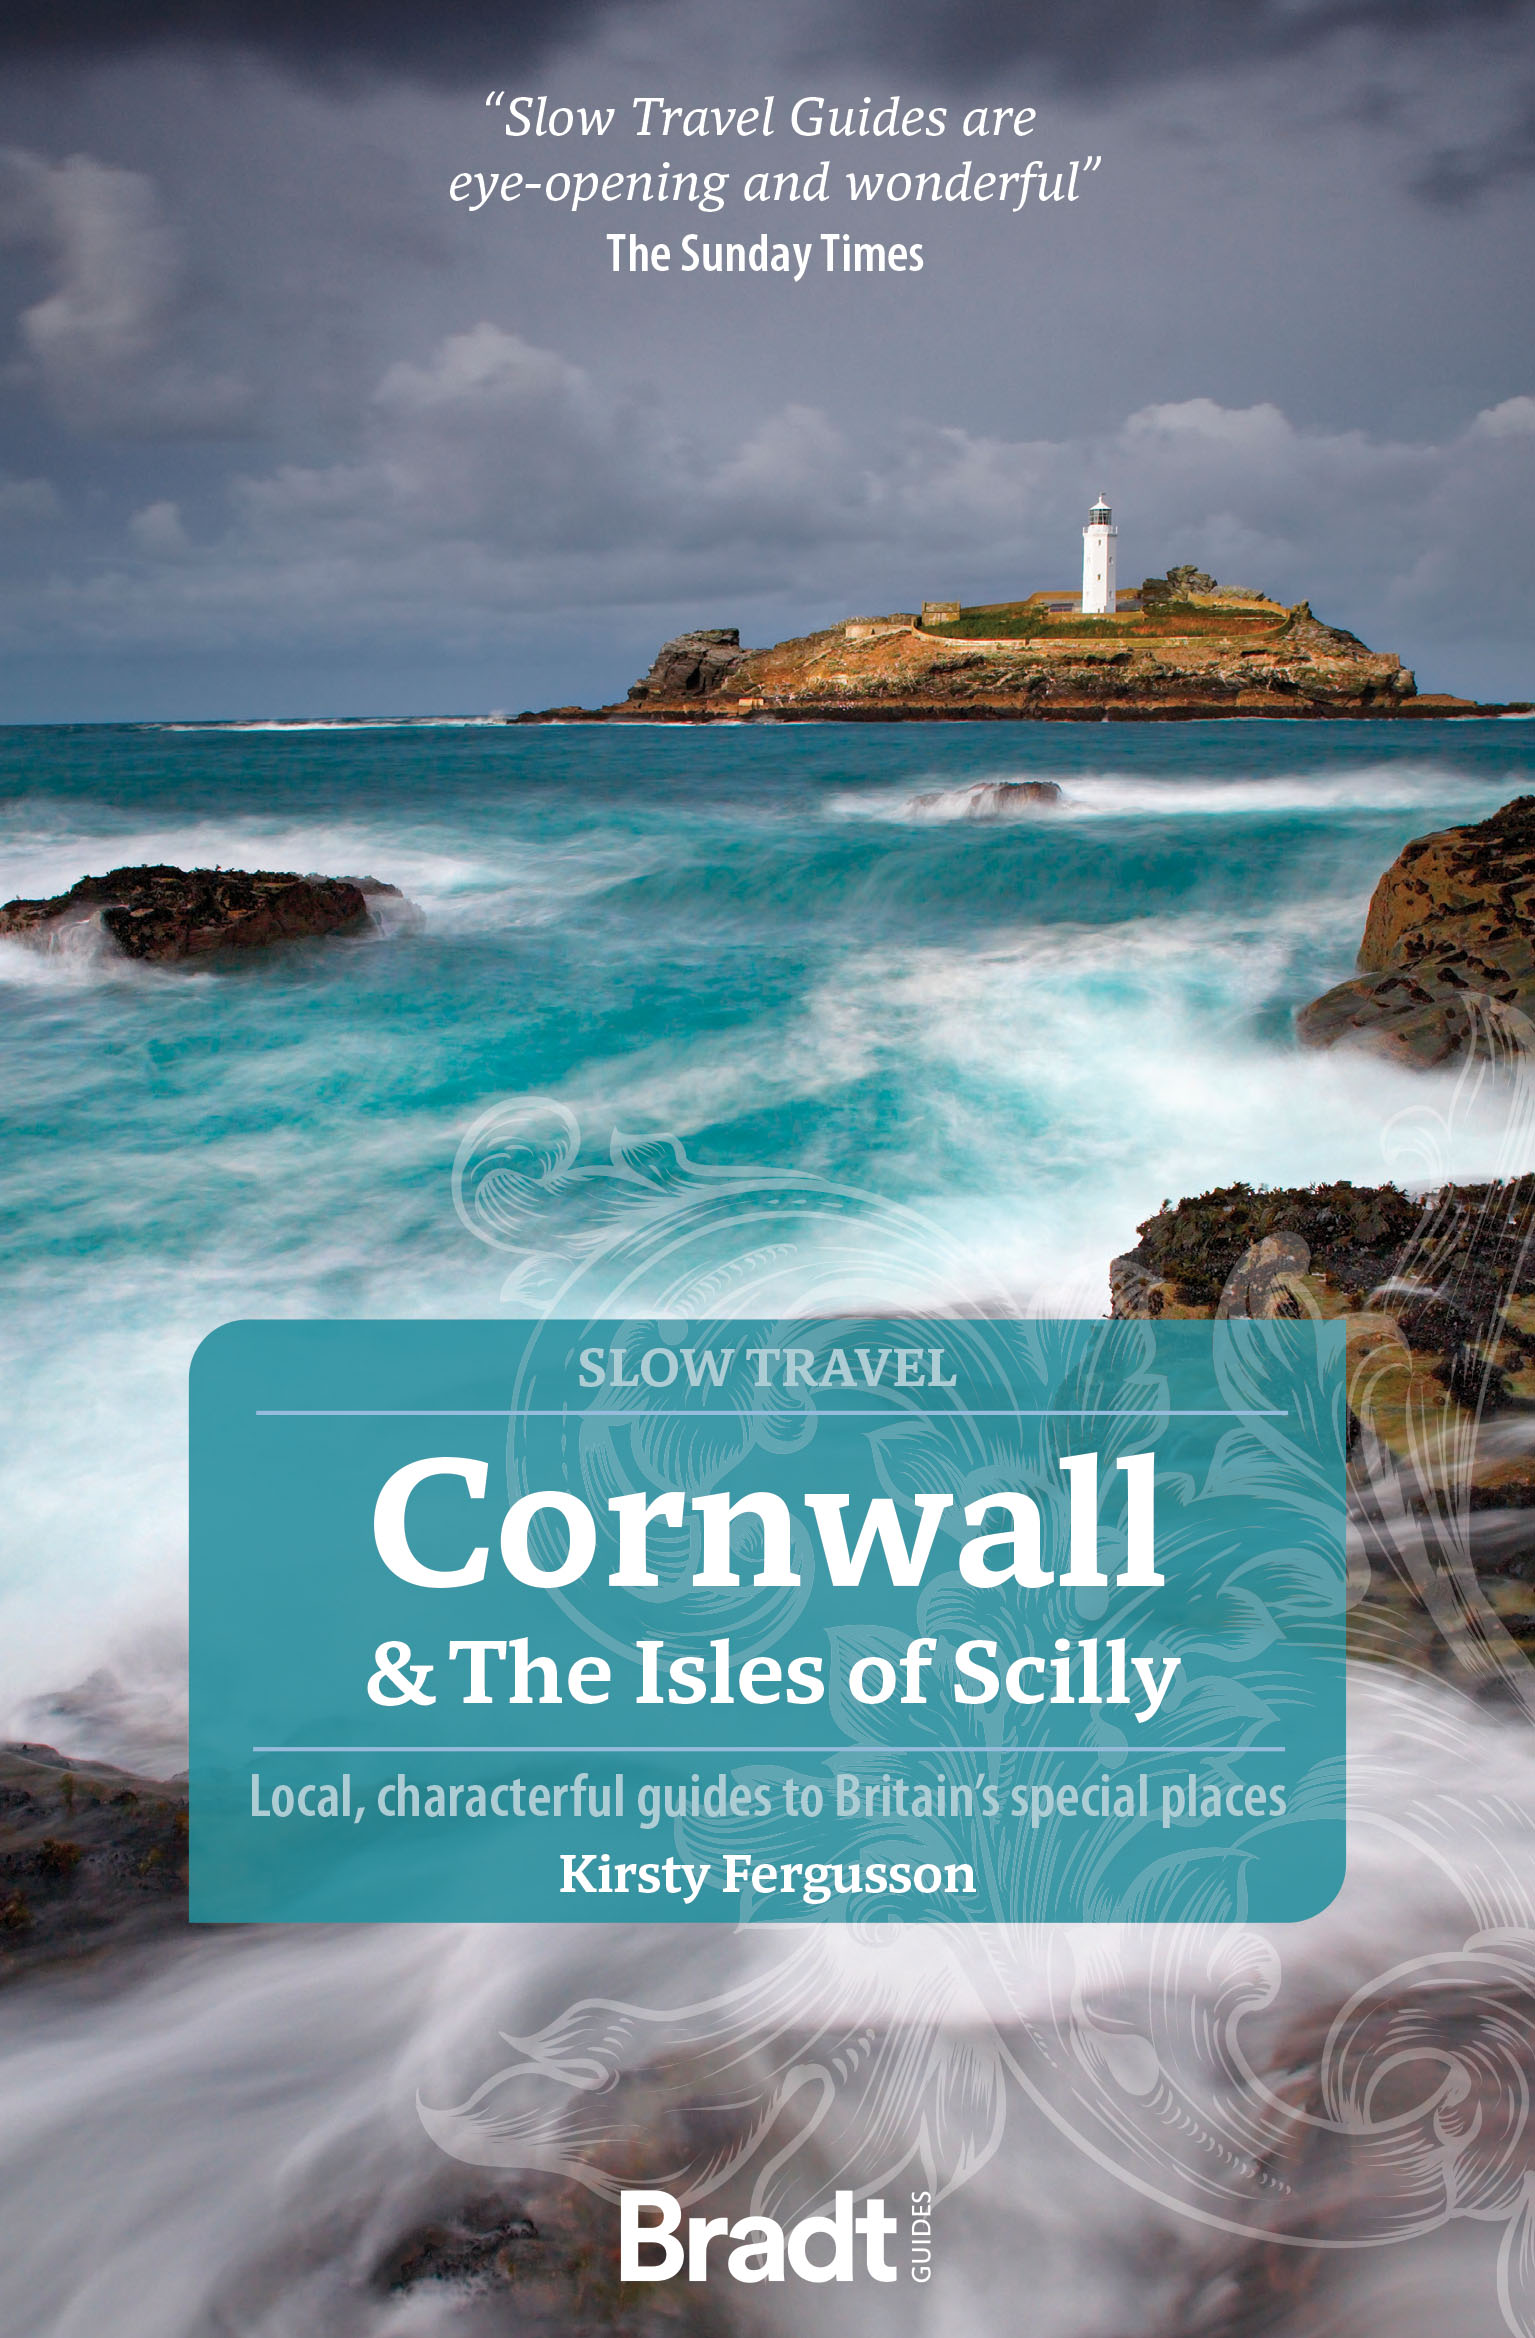 Online bestellen: Reisgids Slow Travel Cornwall and the Islands of Sclilly | Bradt Travel Guides